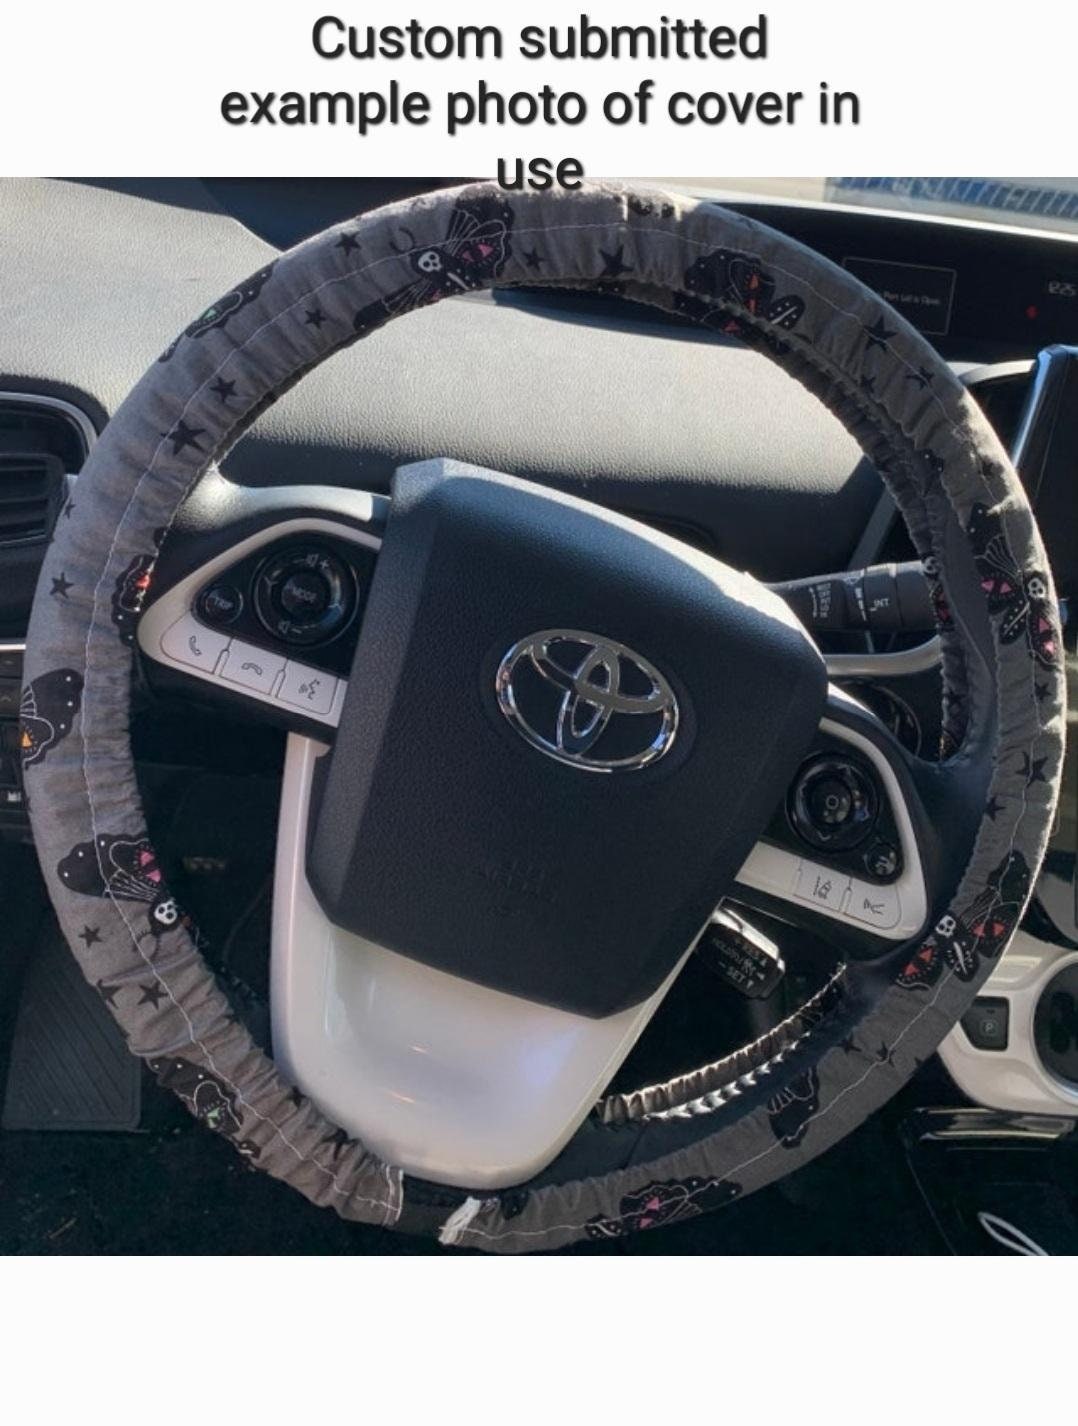 Vibrant Floral Steering Wheel Cover - Harlow's Store and Garden Gifts